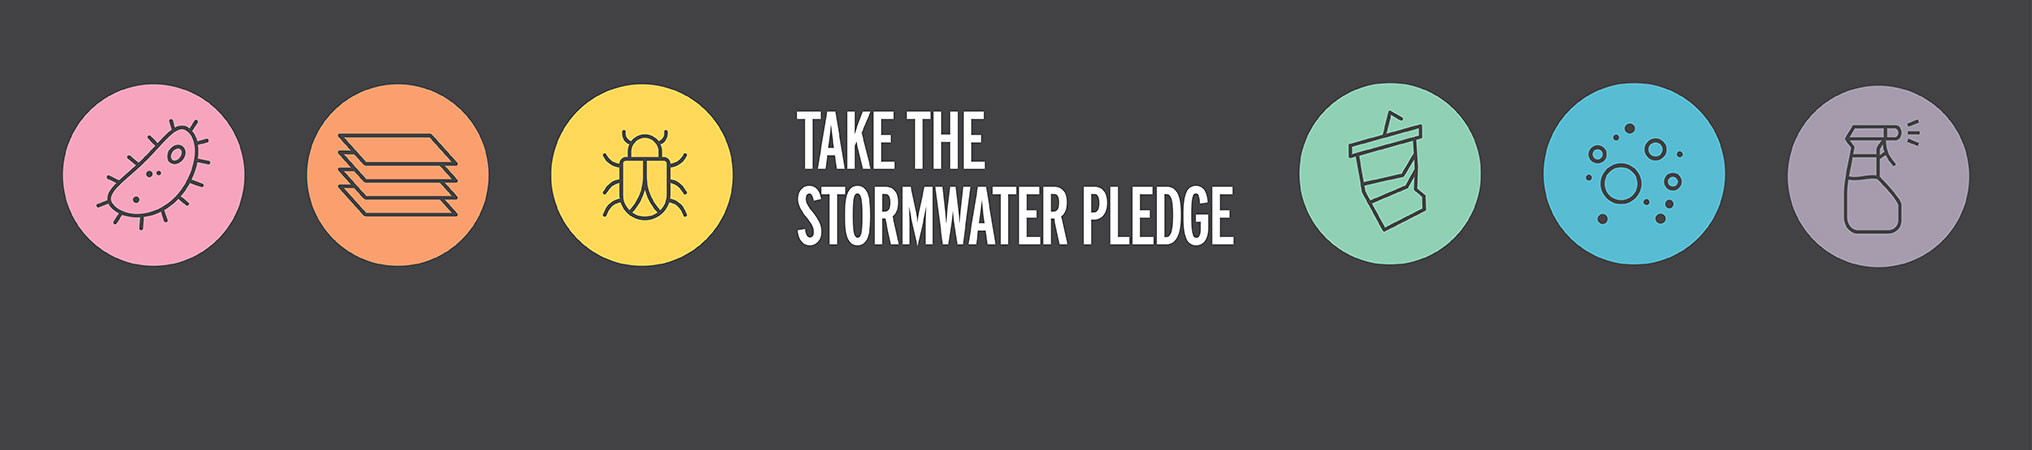 Take the Stormwater Pledge banner